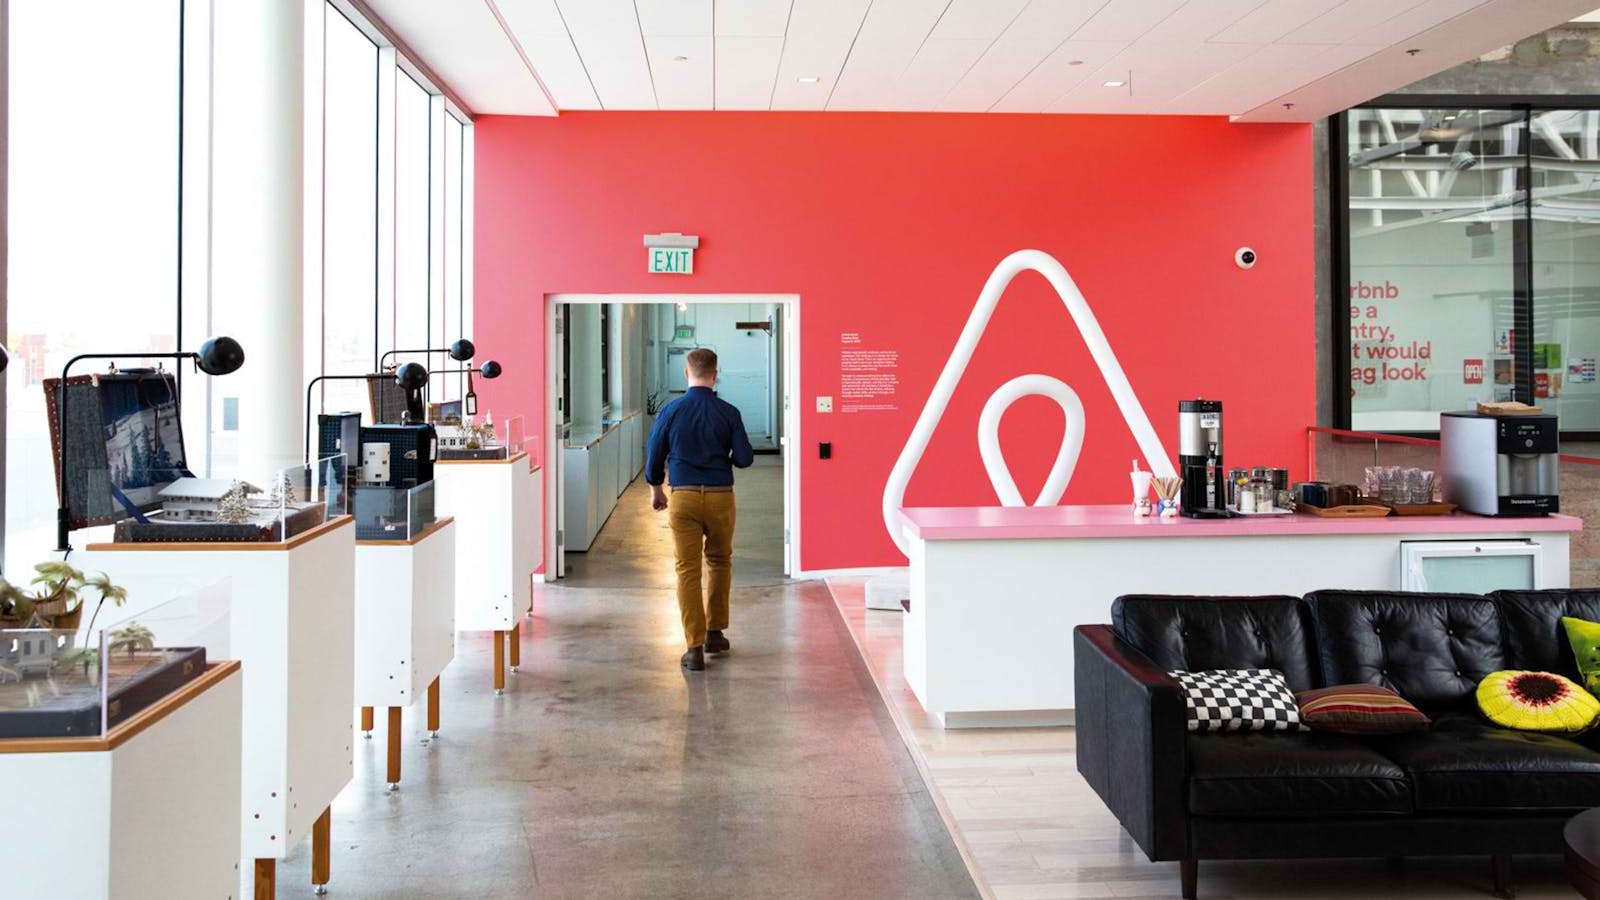 Airbnb’s headquarters in San Francisco. Photo: Airbnb